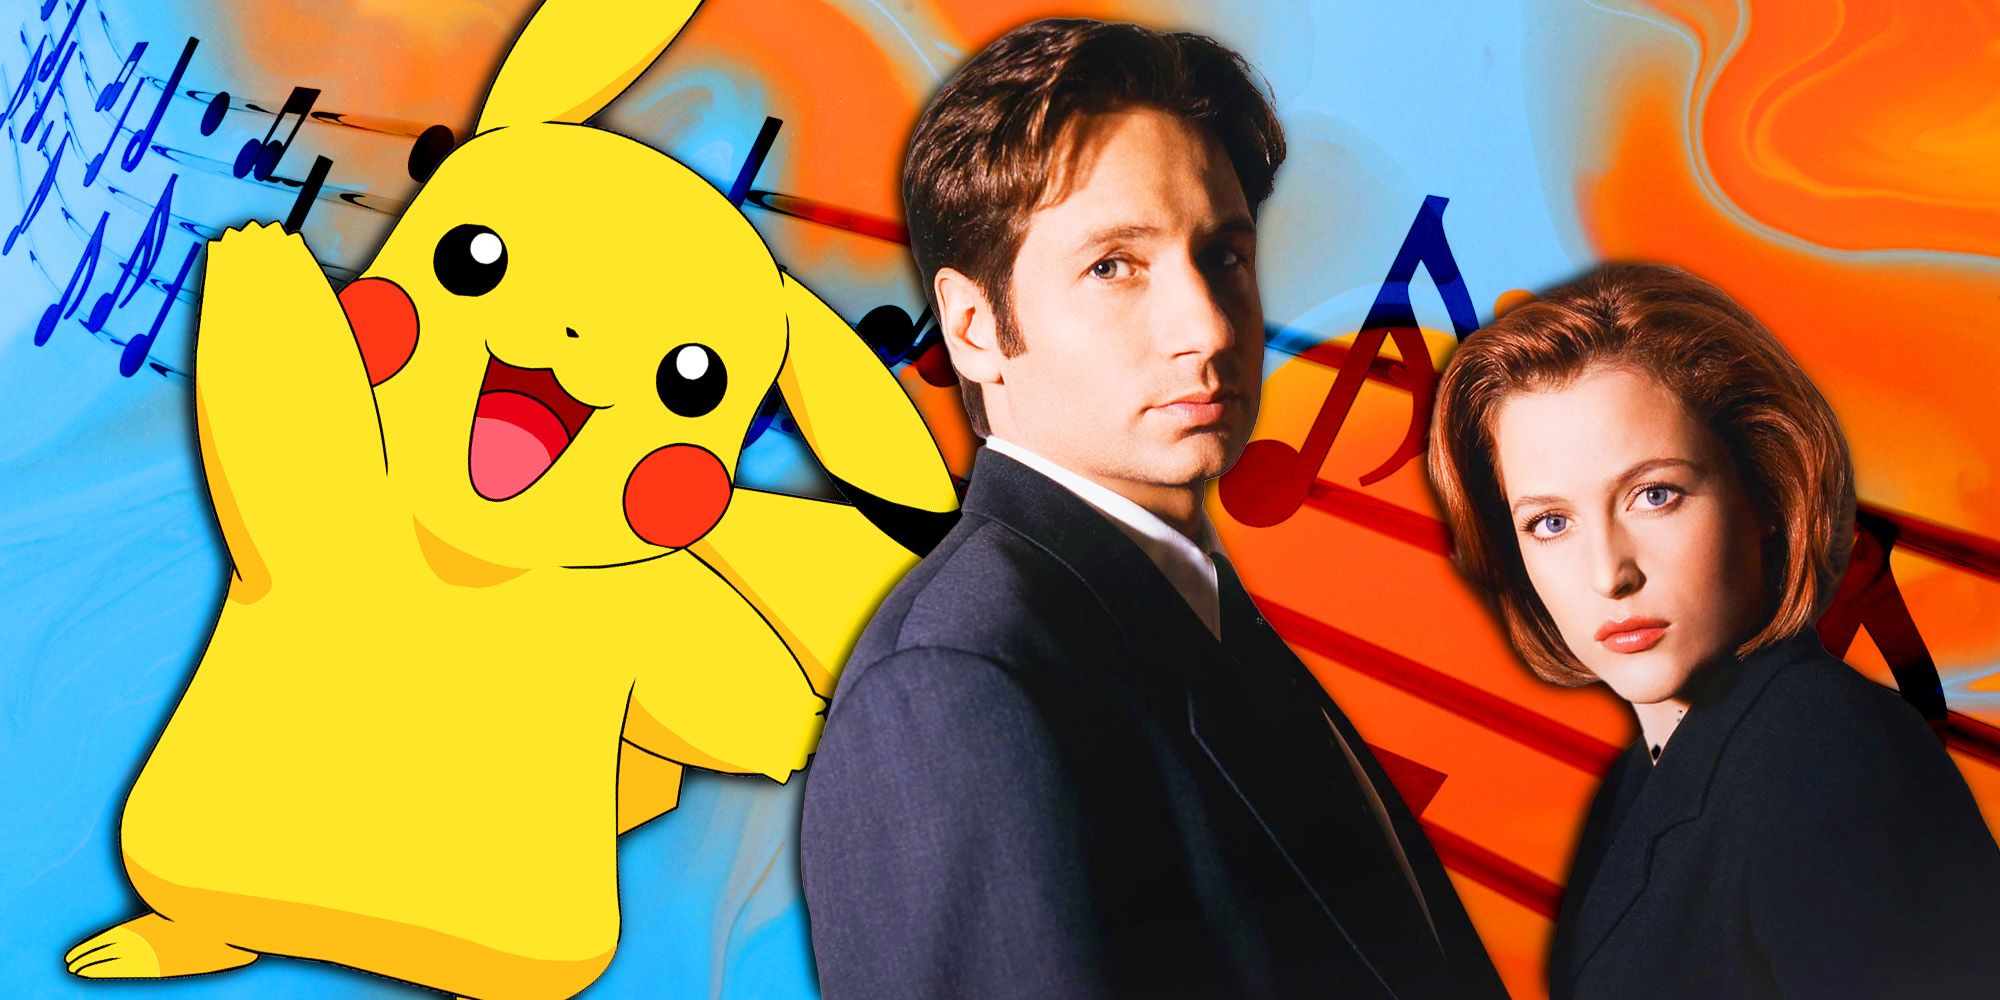 Pikachu from Pokemon and Mulder and Scully from The X-Files